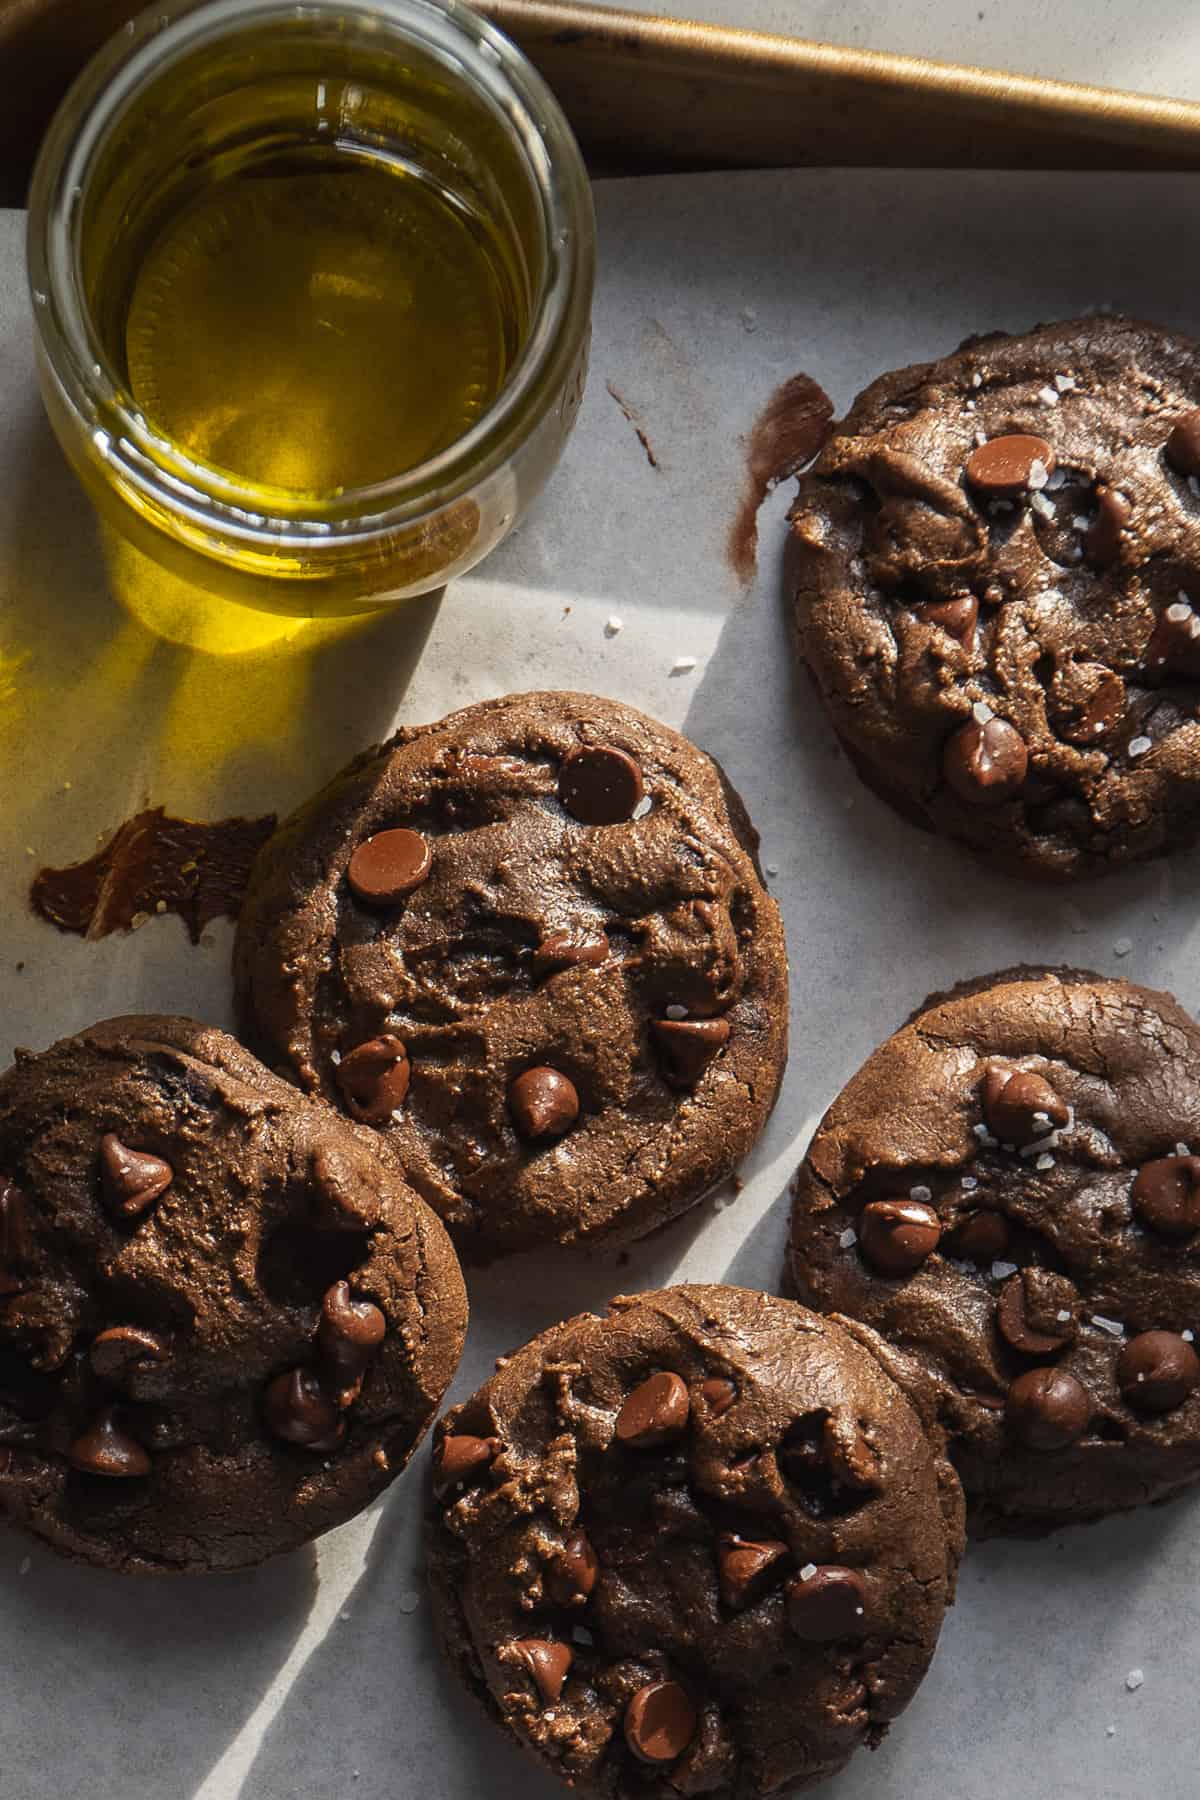 Chocolate olive oil cookies with chocolate chips on a baking sheet.